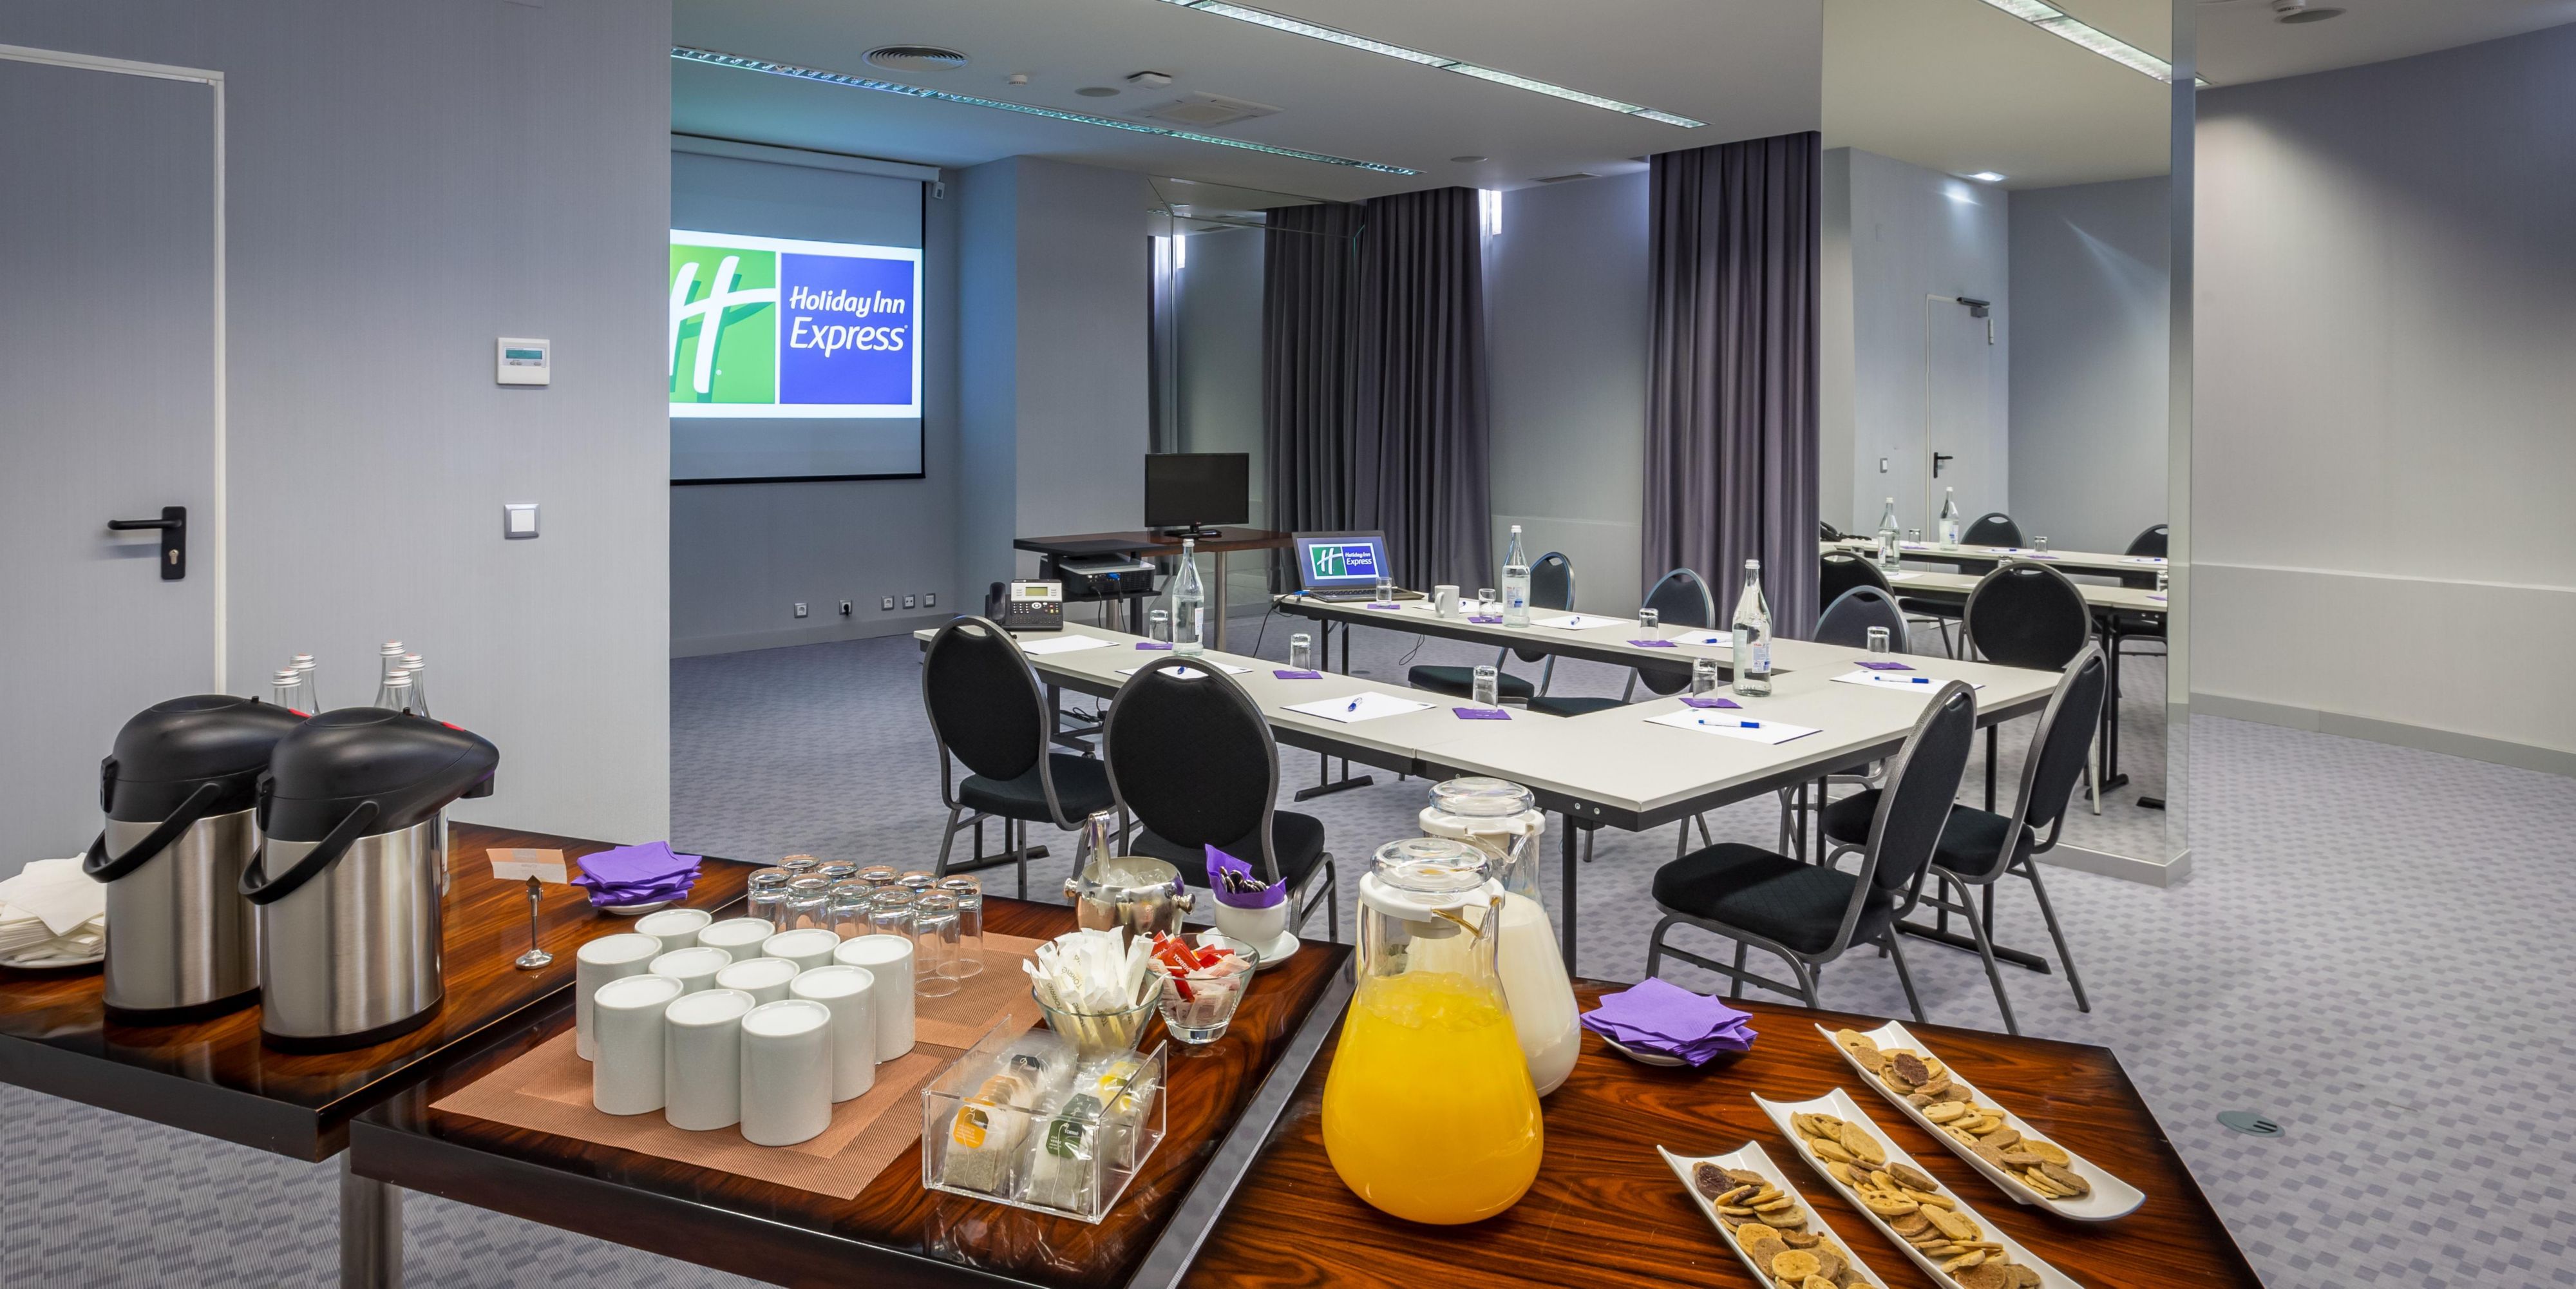 A convenient meeting venue in the heart of Lisbon.
Business and corporate guests are welcome to use the hotel's modern, spacious boardroom, which comfortably hosts meetings or presentations for up to 40 people. The room comes with free Wi-Fi and presentation facilities are available on request.